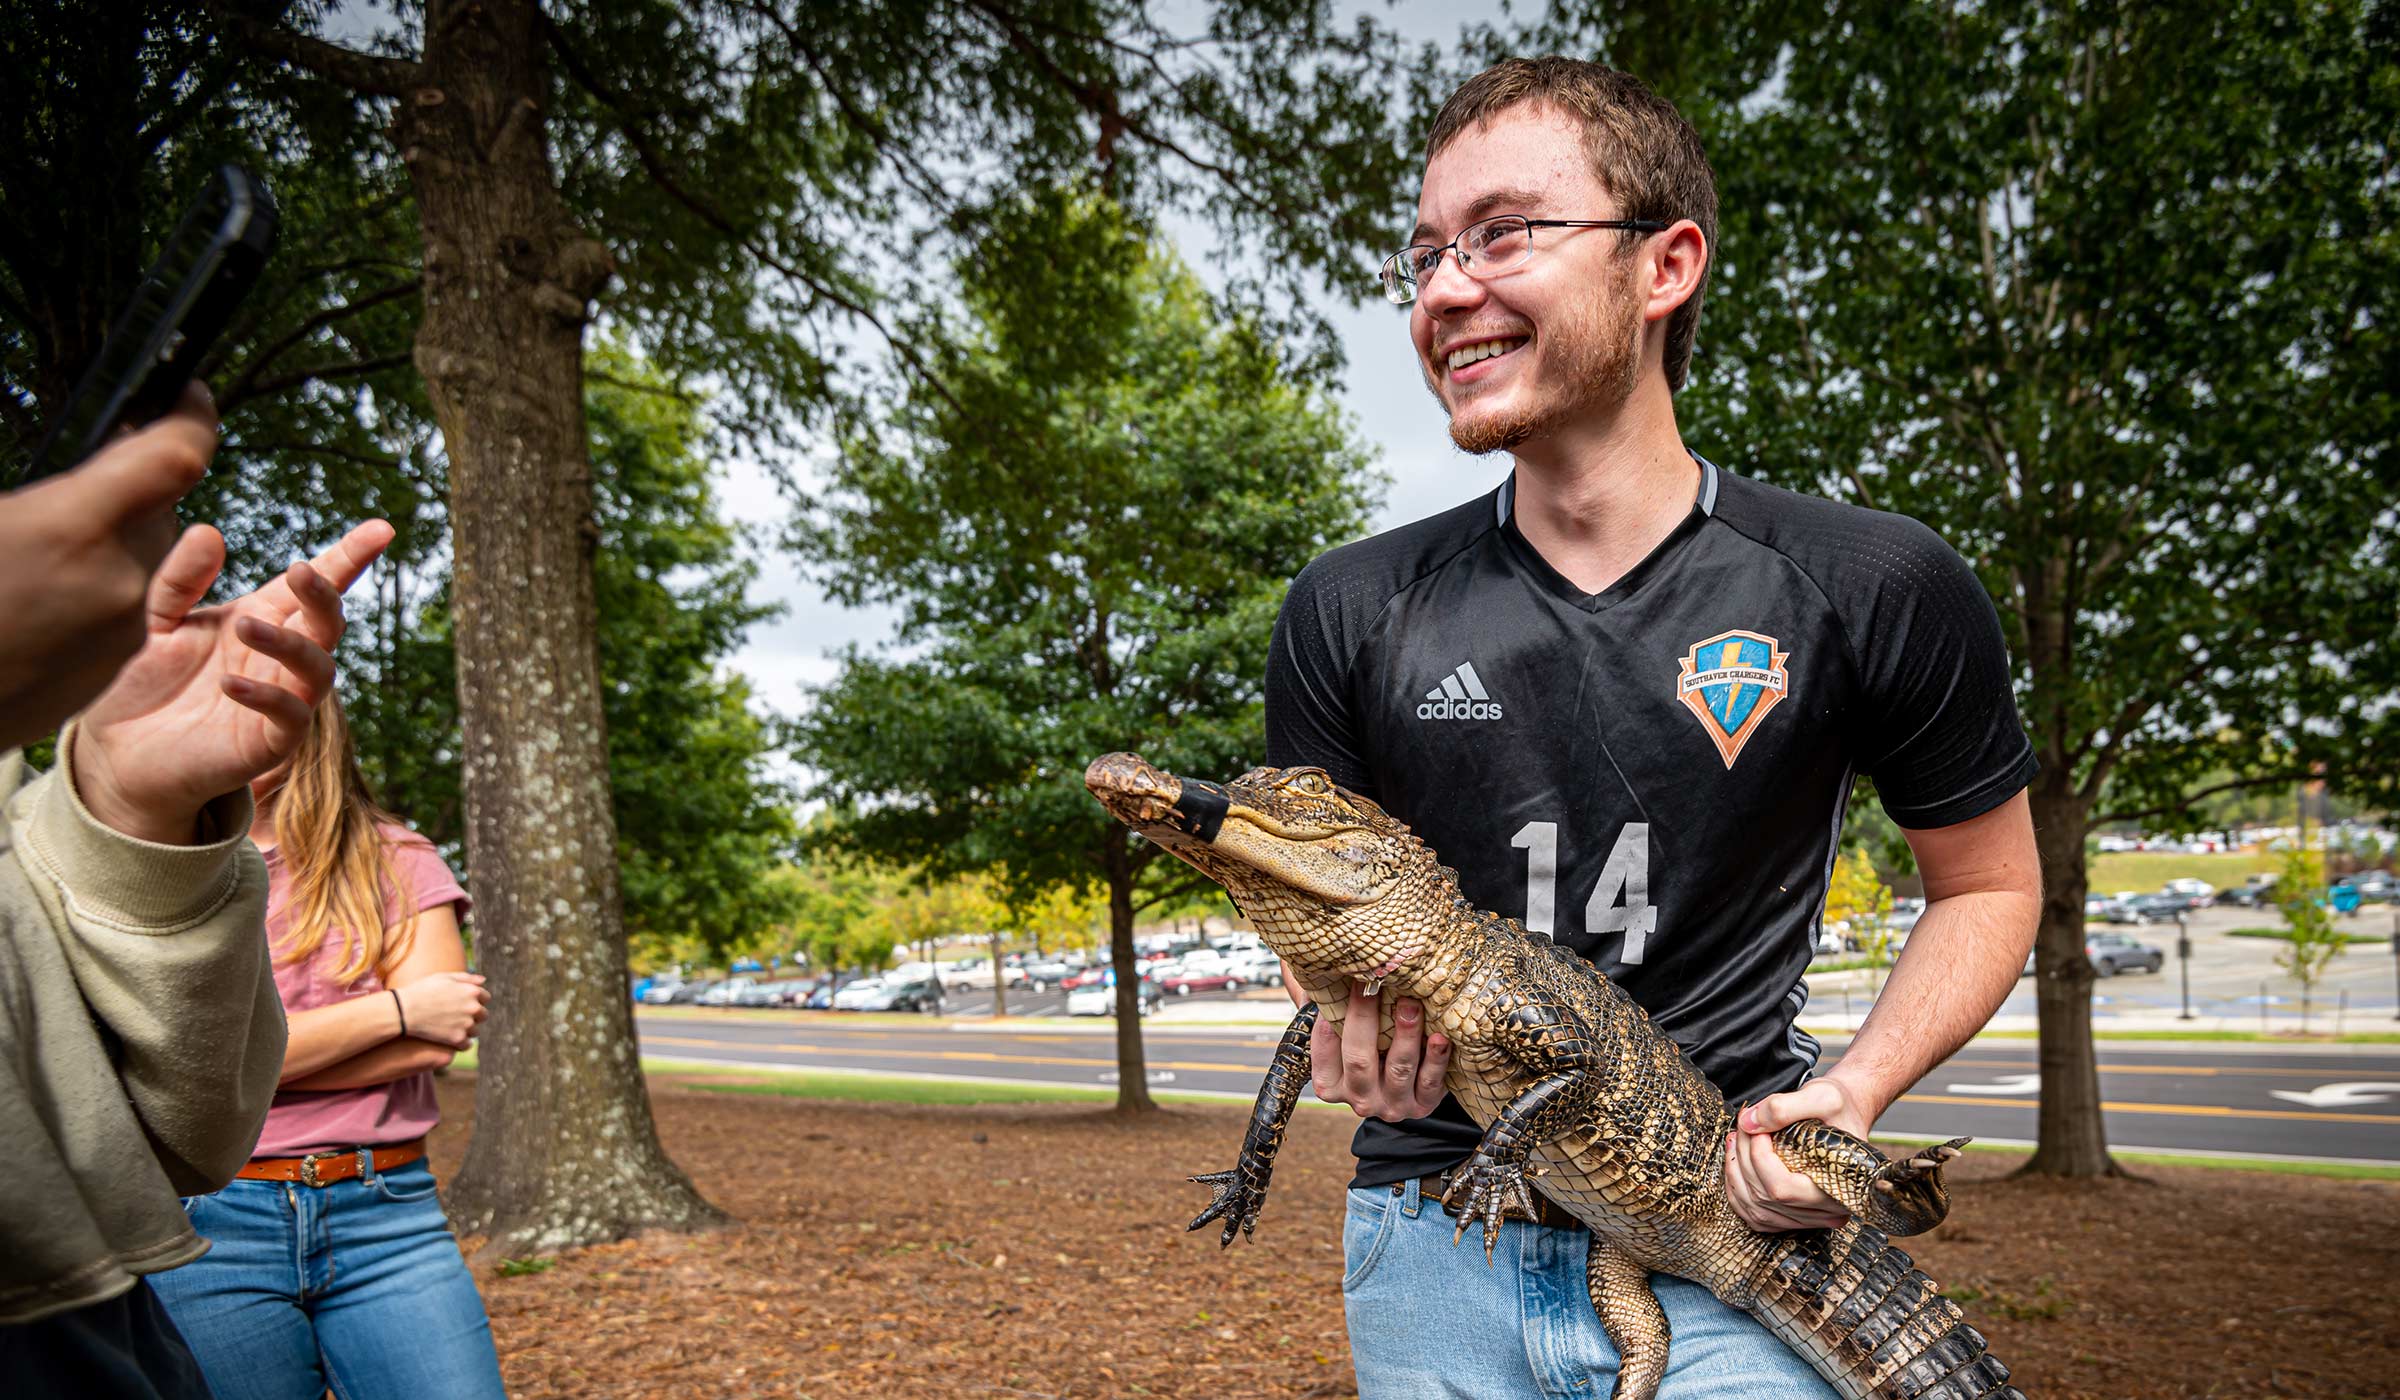 Guy with glasses in dark shirt holding young alligator